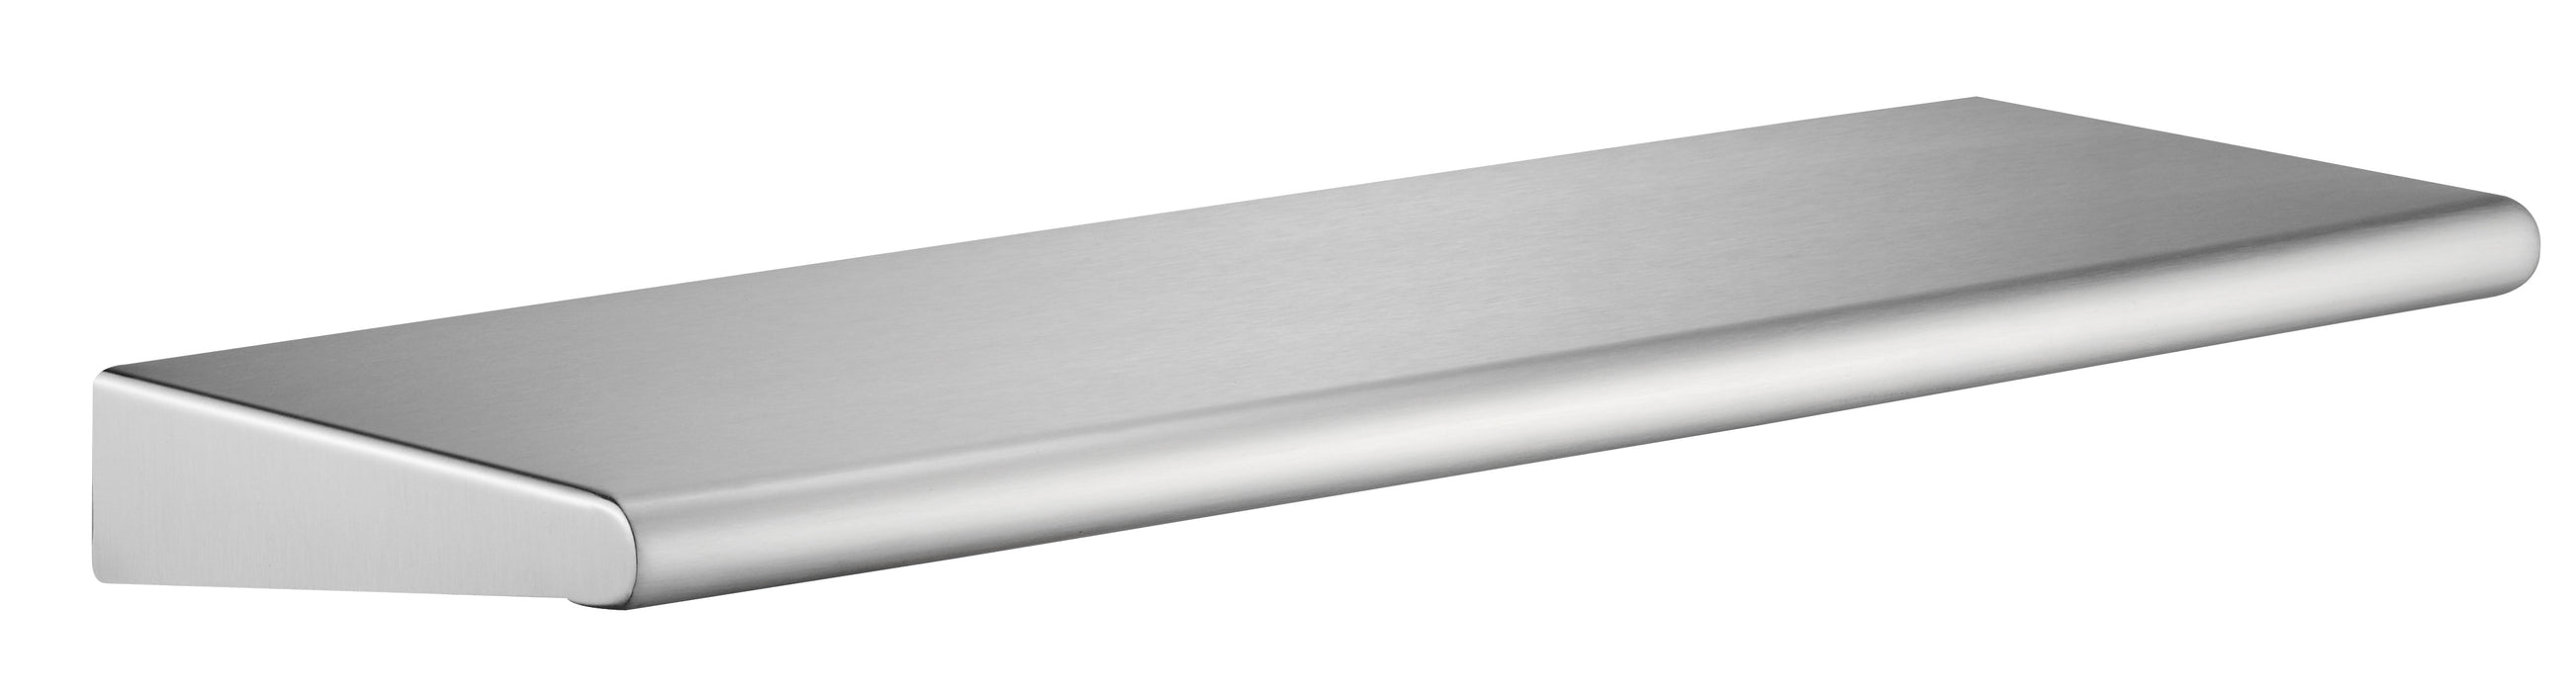 ASI 20692-618 Surface Mounted Shelf, Stainless Steel, 6 X 18 Inch